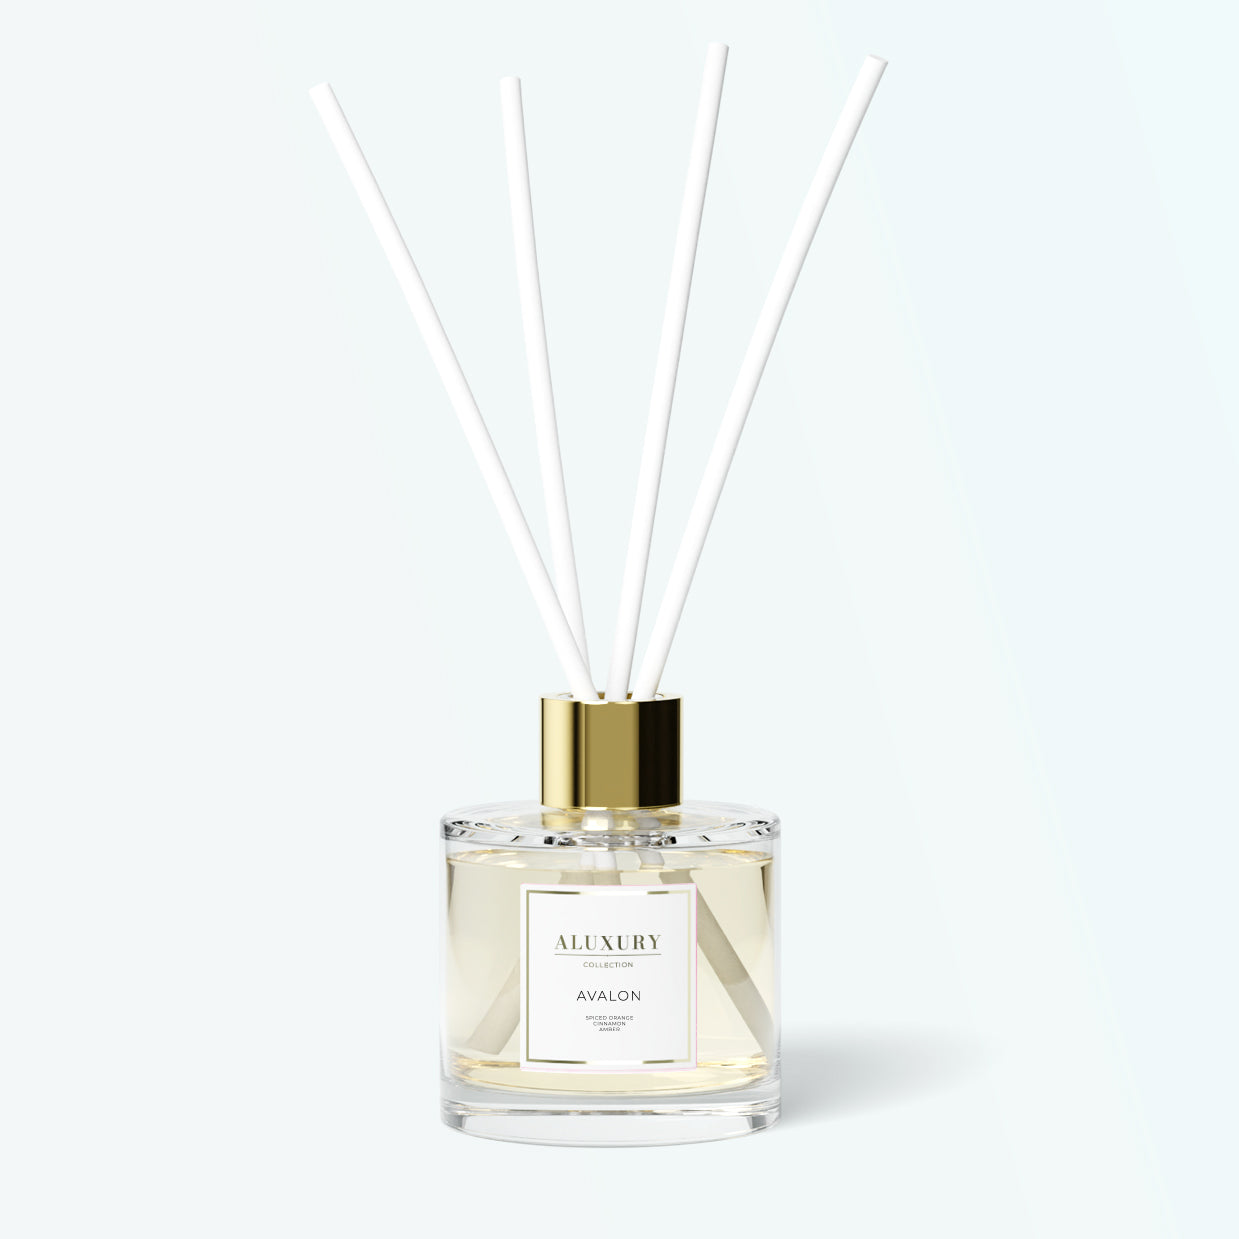 Avalon glass luxury reed diffuser with white reeds by Aluxury